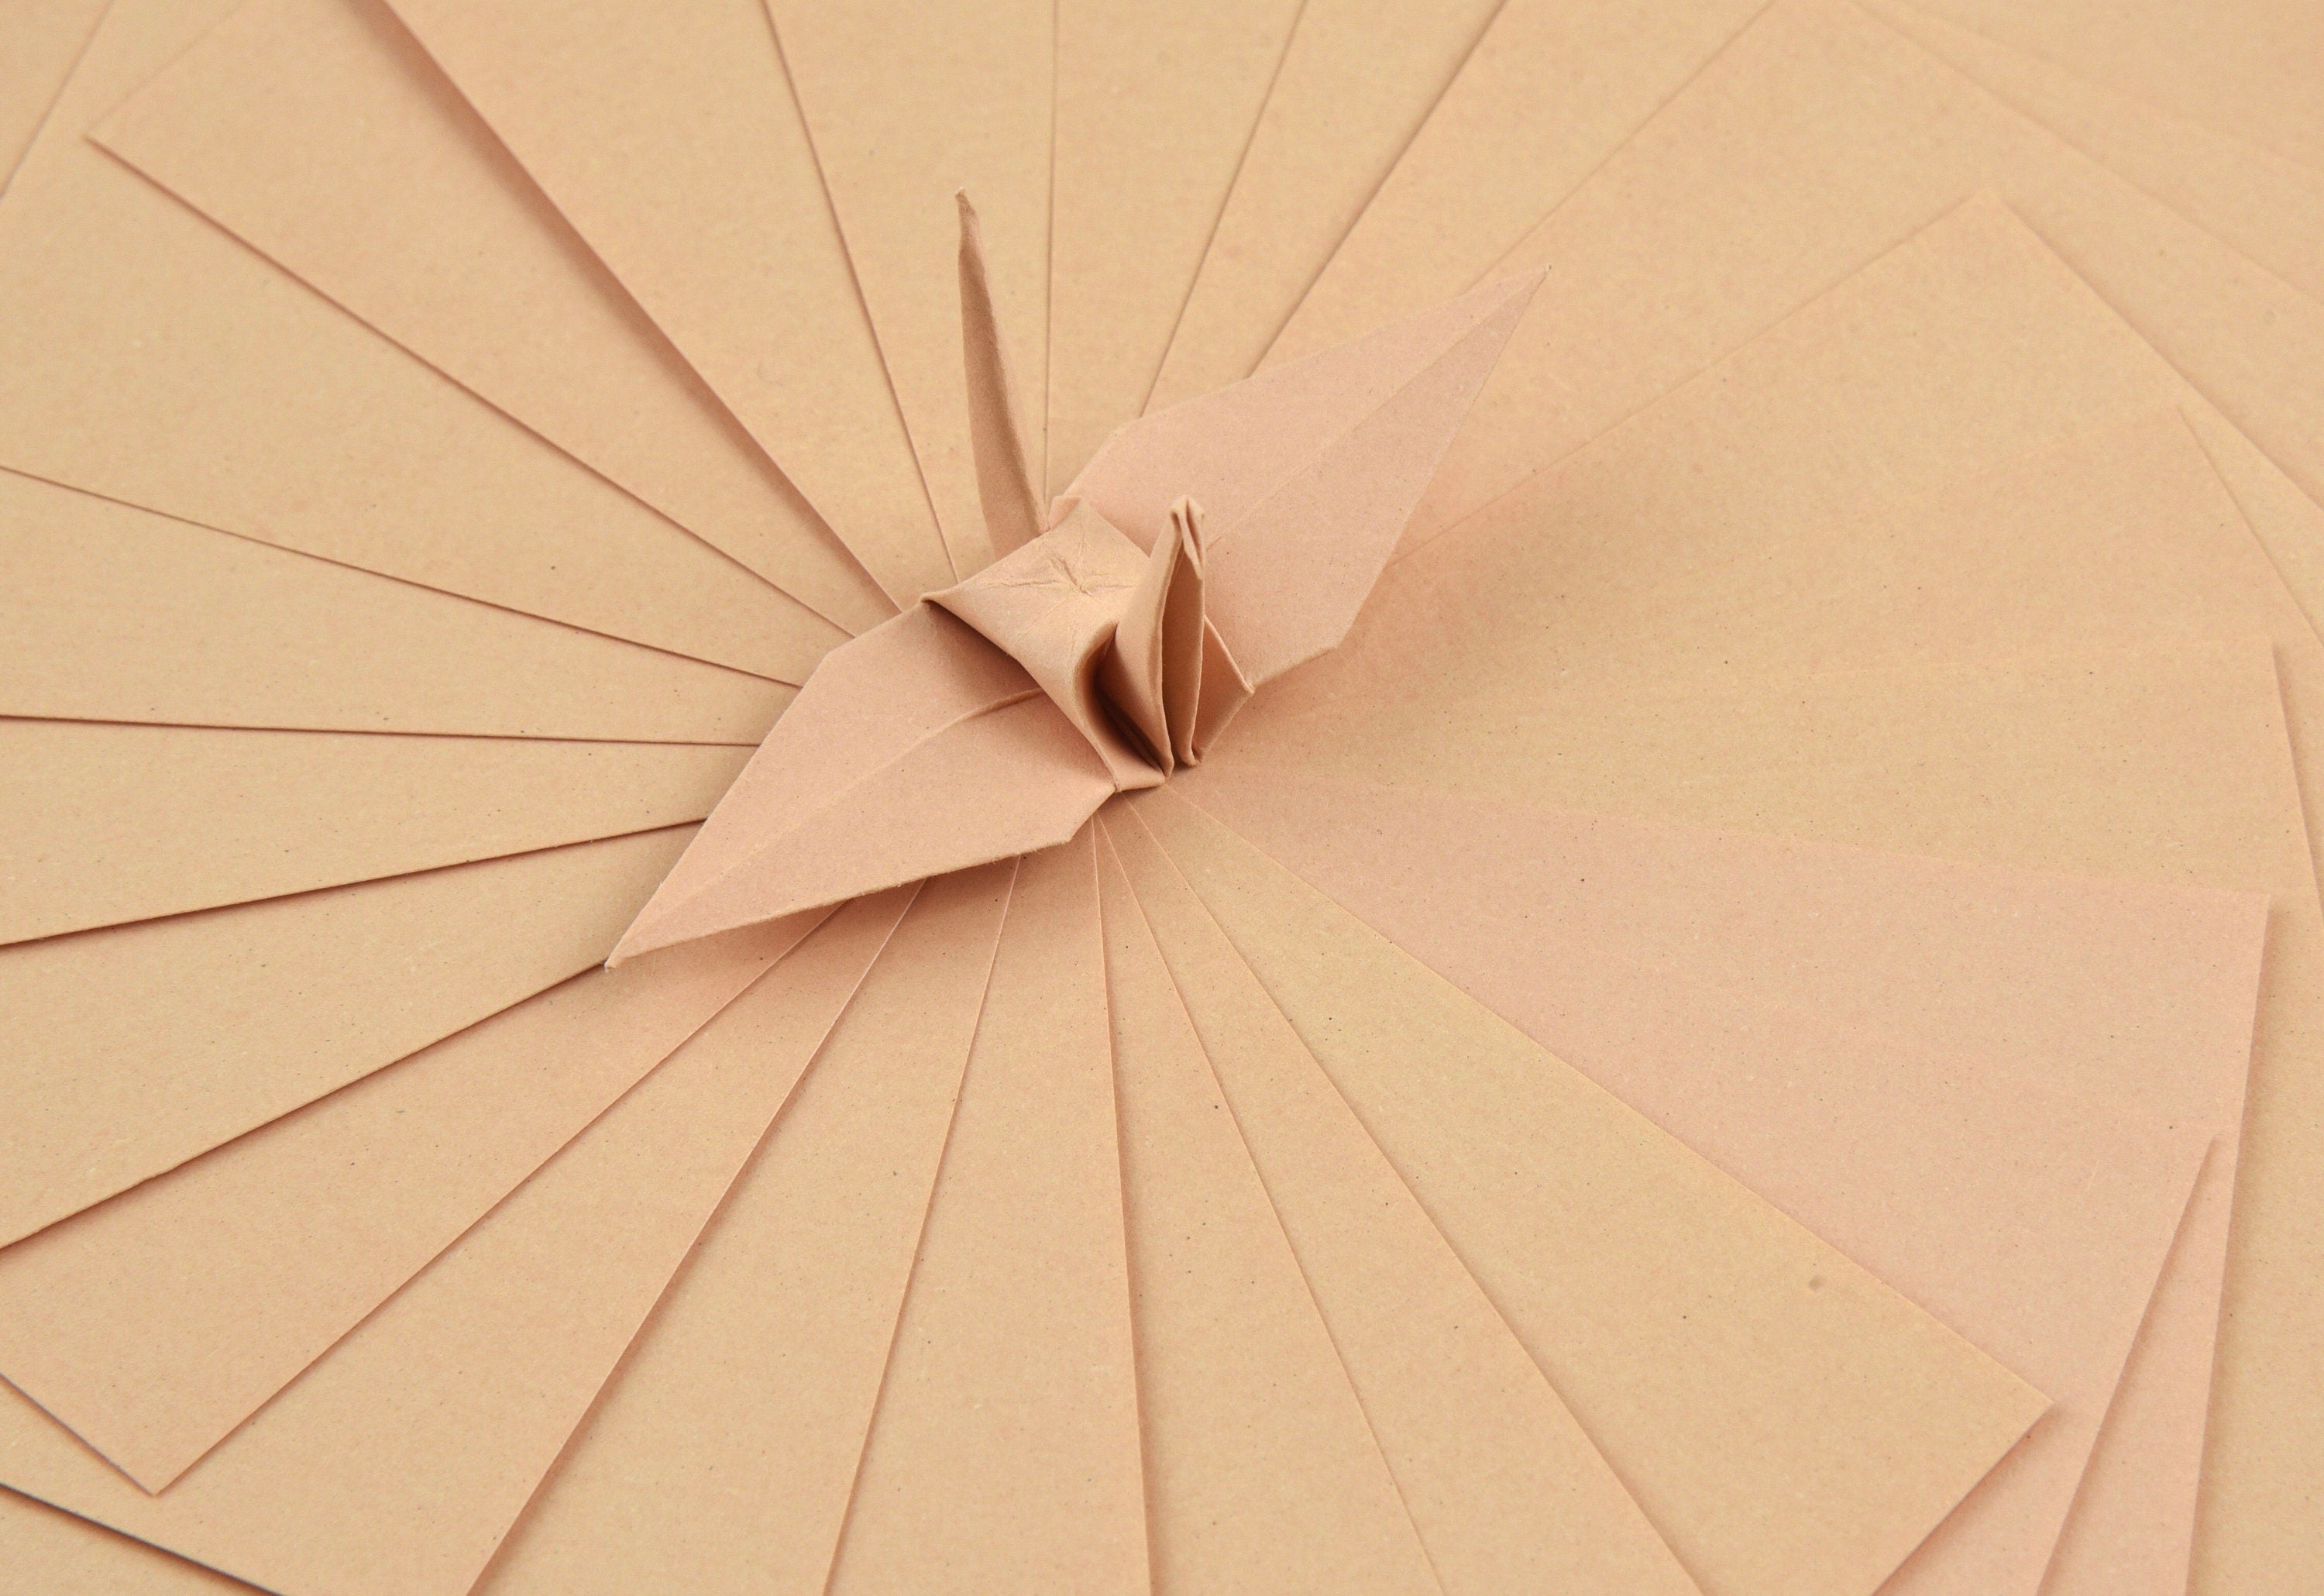 100 Base Origami Paper Sheets 6x6 inches Square Paper Pack for Folding, Origami Cranes, and Decoration - S02